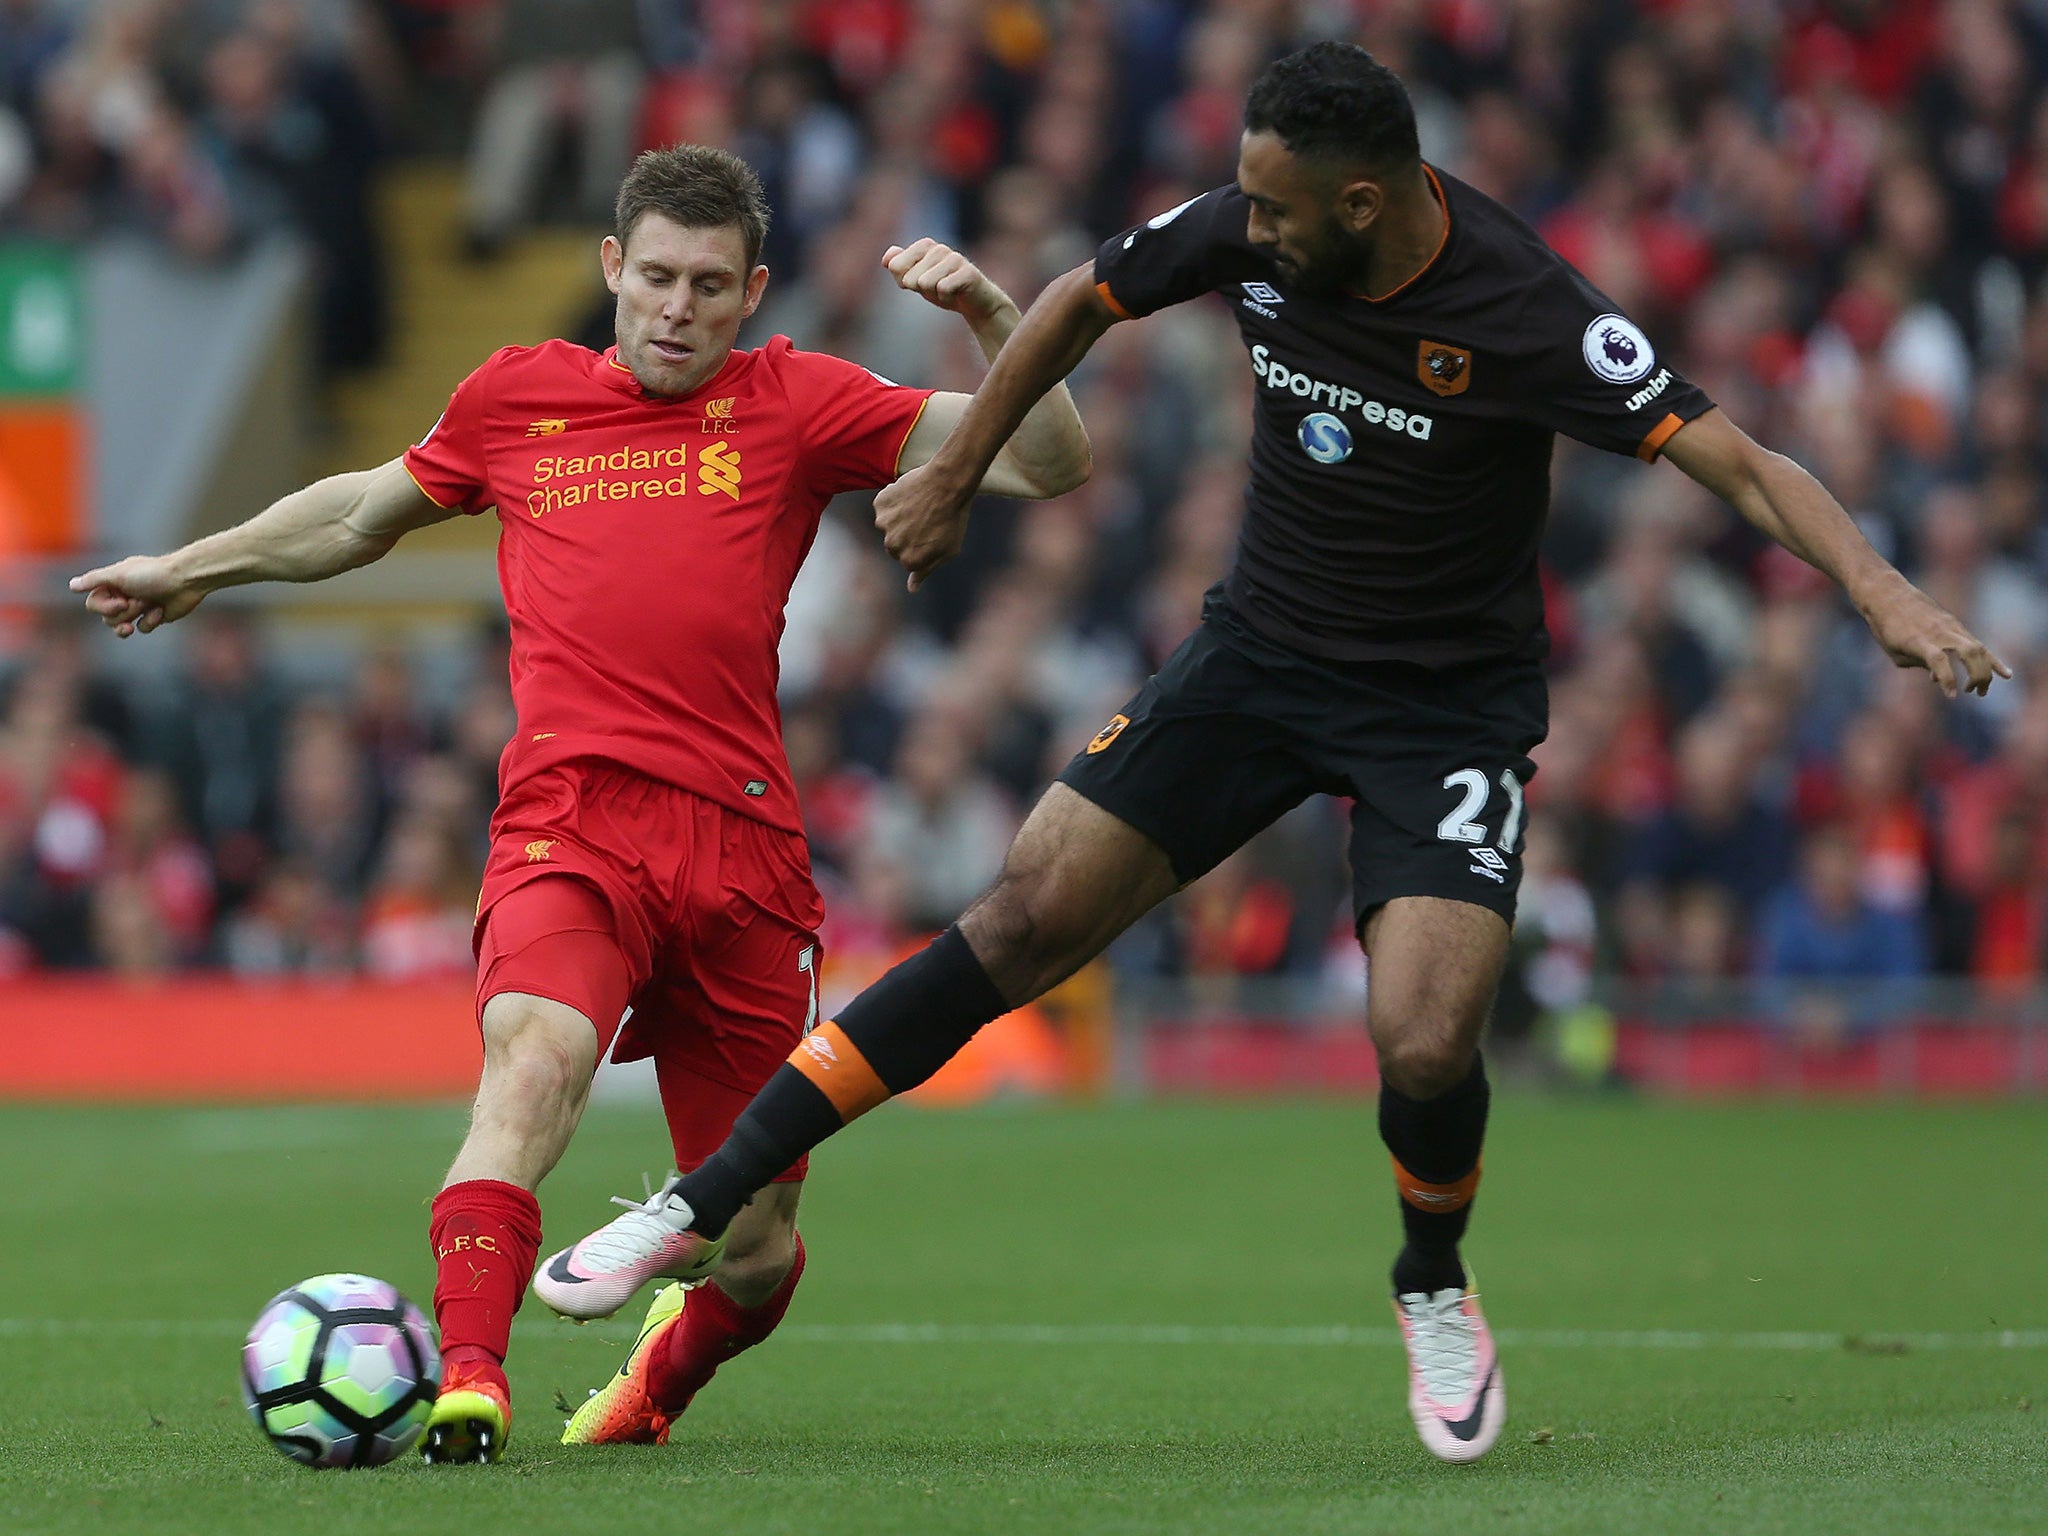 Milner and Elmohamady battle for the ball at Anfield